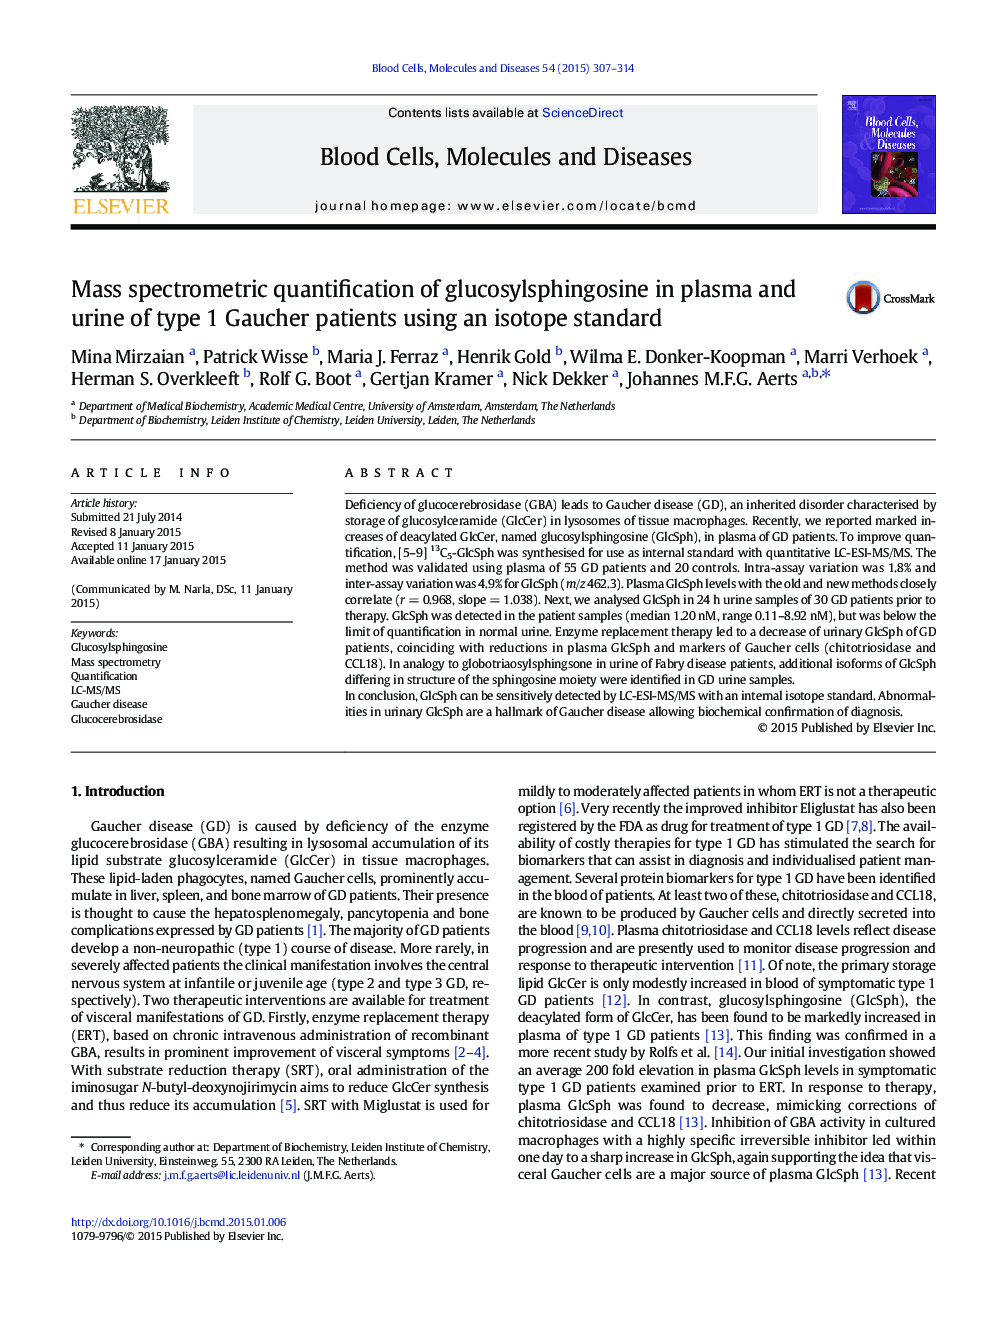 Mass spectrometric quantification of glucosylsphingosine in plasma and urine of type 1 Gaucher patients using an isotope standard